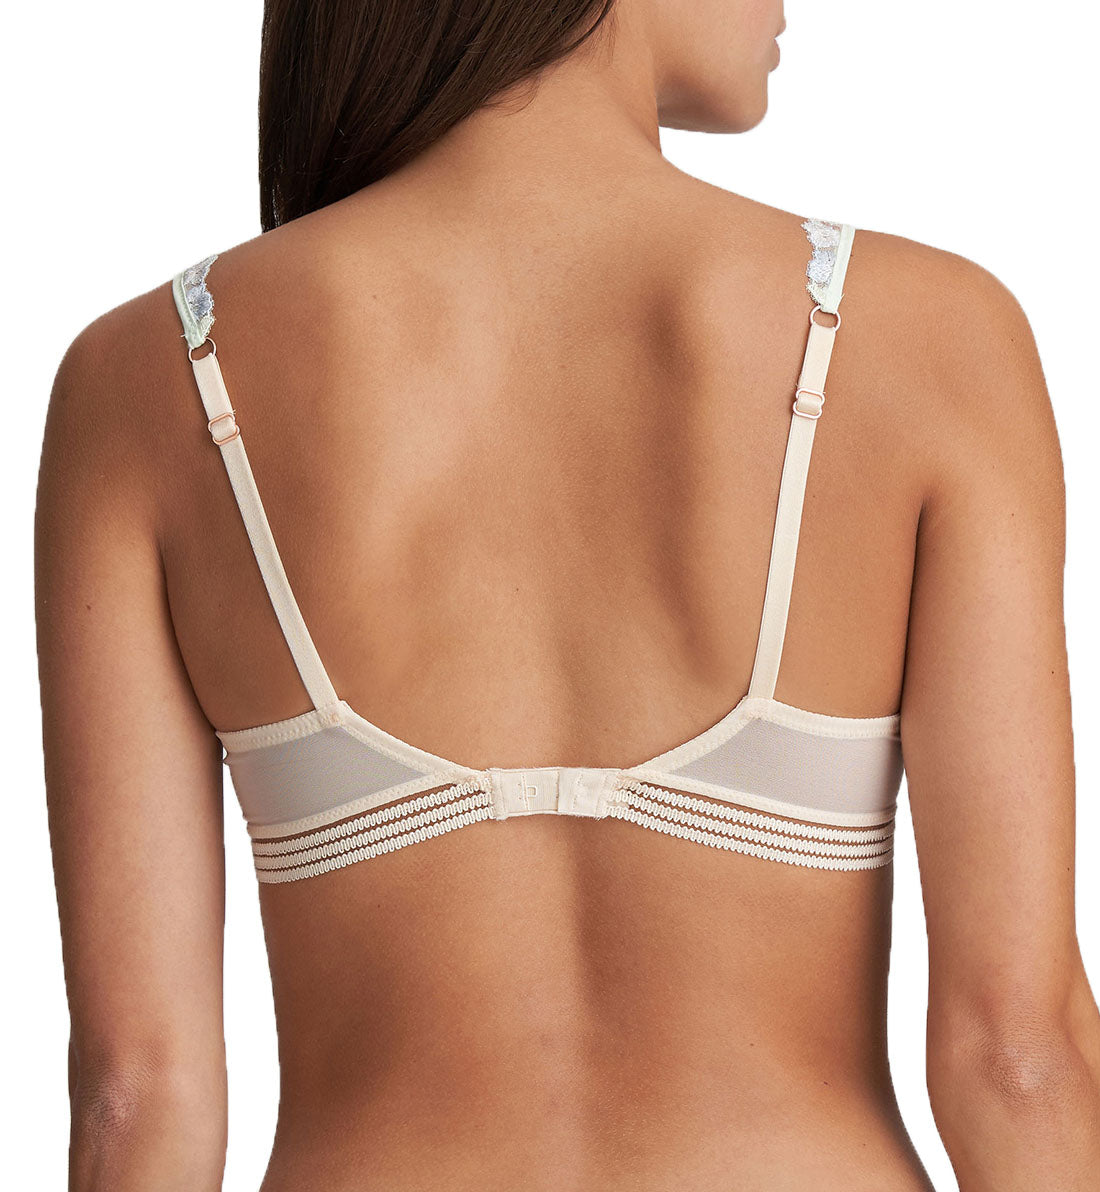 Marie Jo Nathy Padded Balcony Underwire Bra (0102489),30D,Pearled Ivory - Pearled Ivory,30D